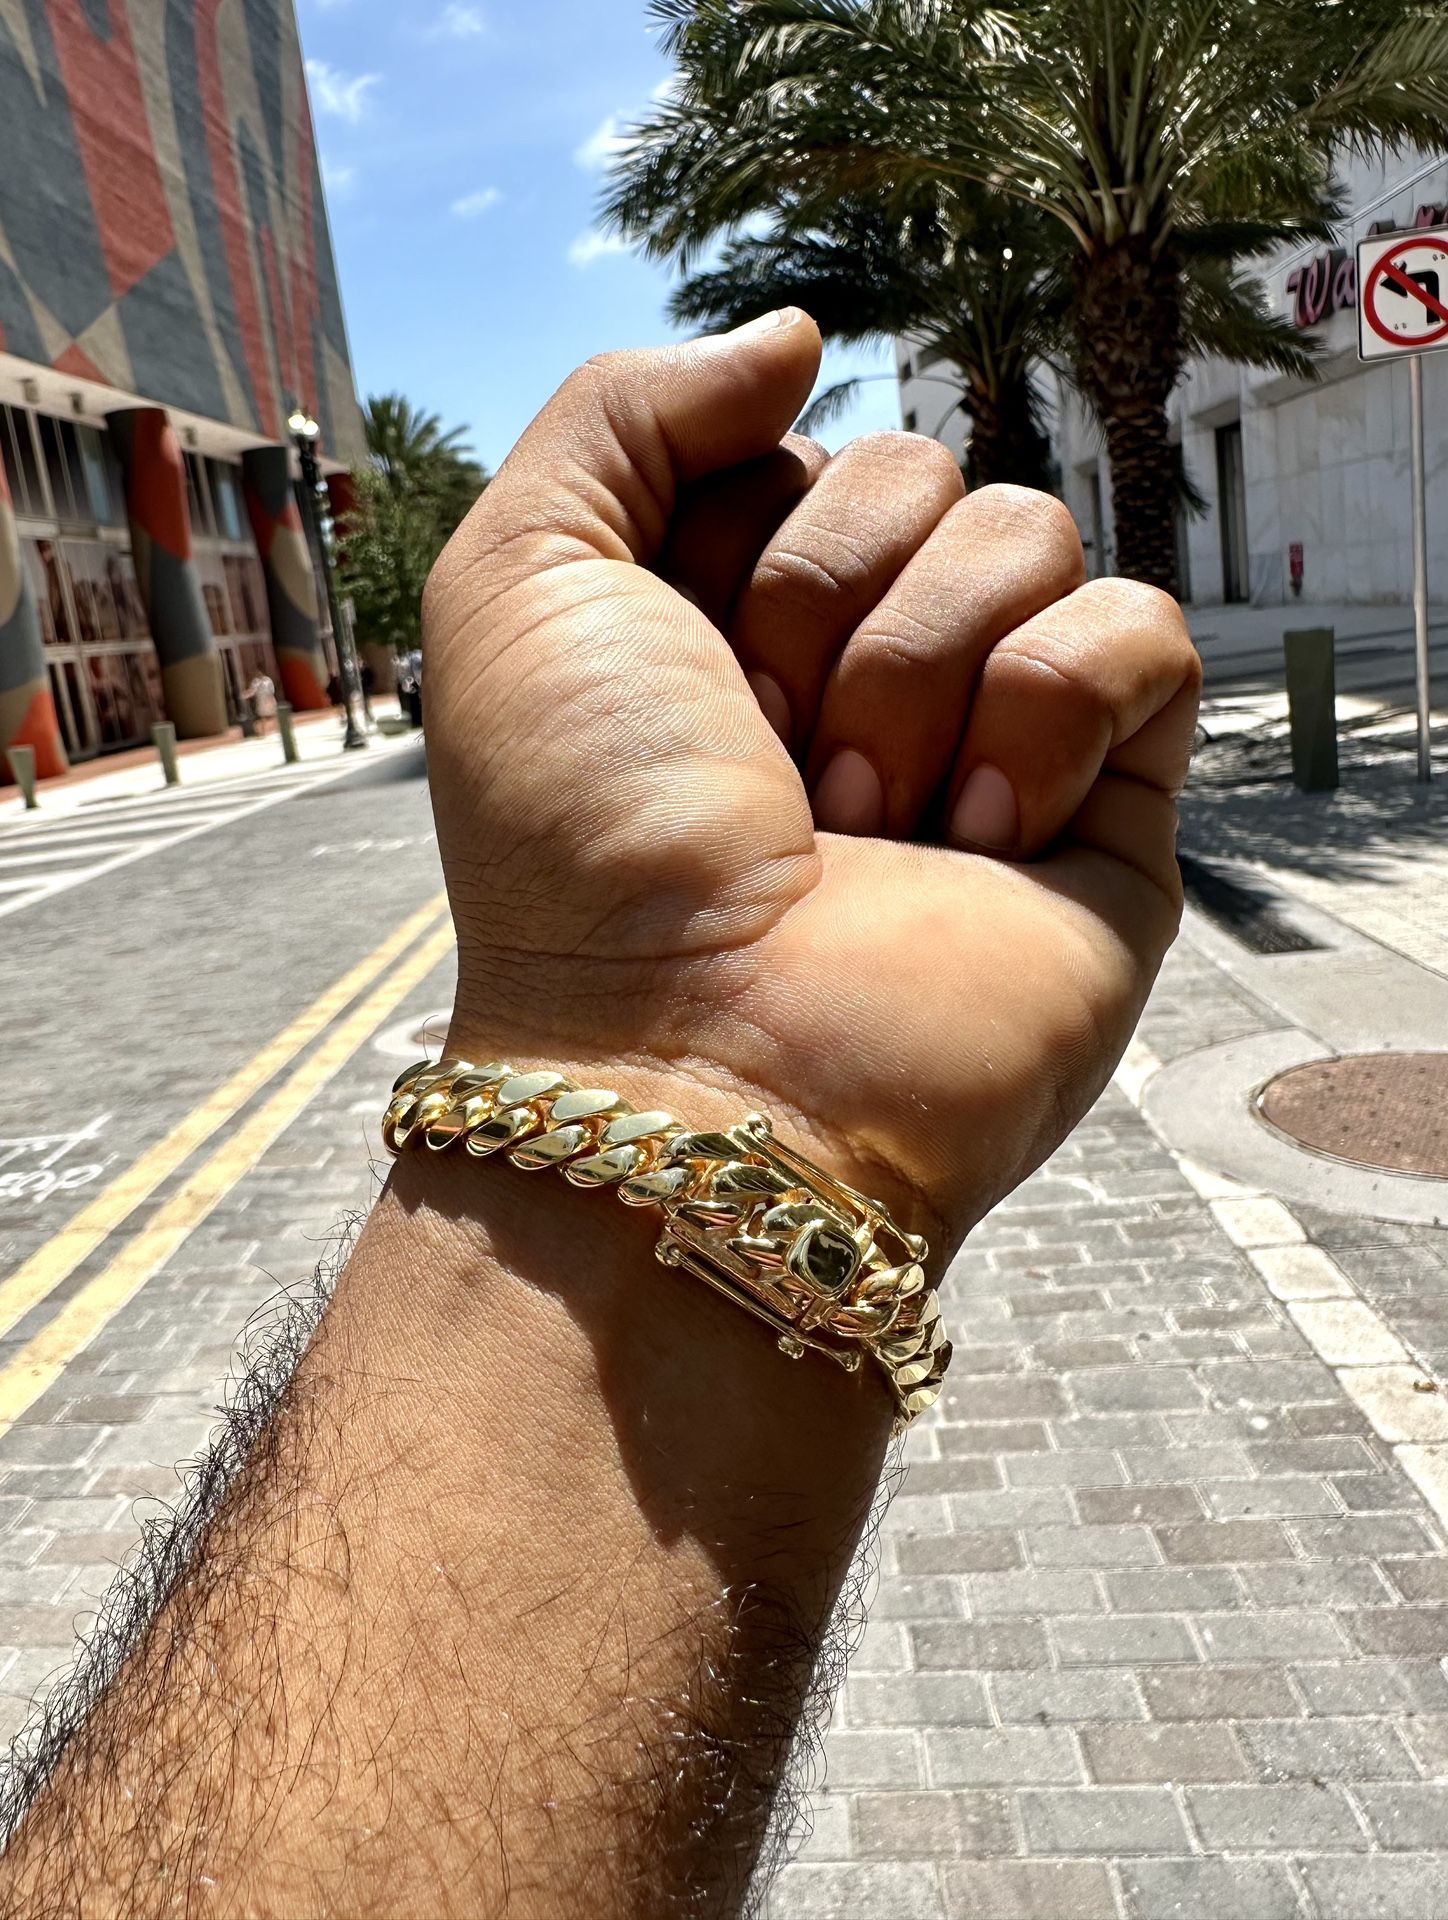 🌴10mm 7.5” Miami Downtown🏭 Is The Location Gus Villa Jewelry With The Best  Prices🔥 And The Best ⛓️Links 